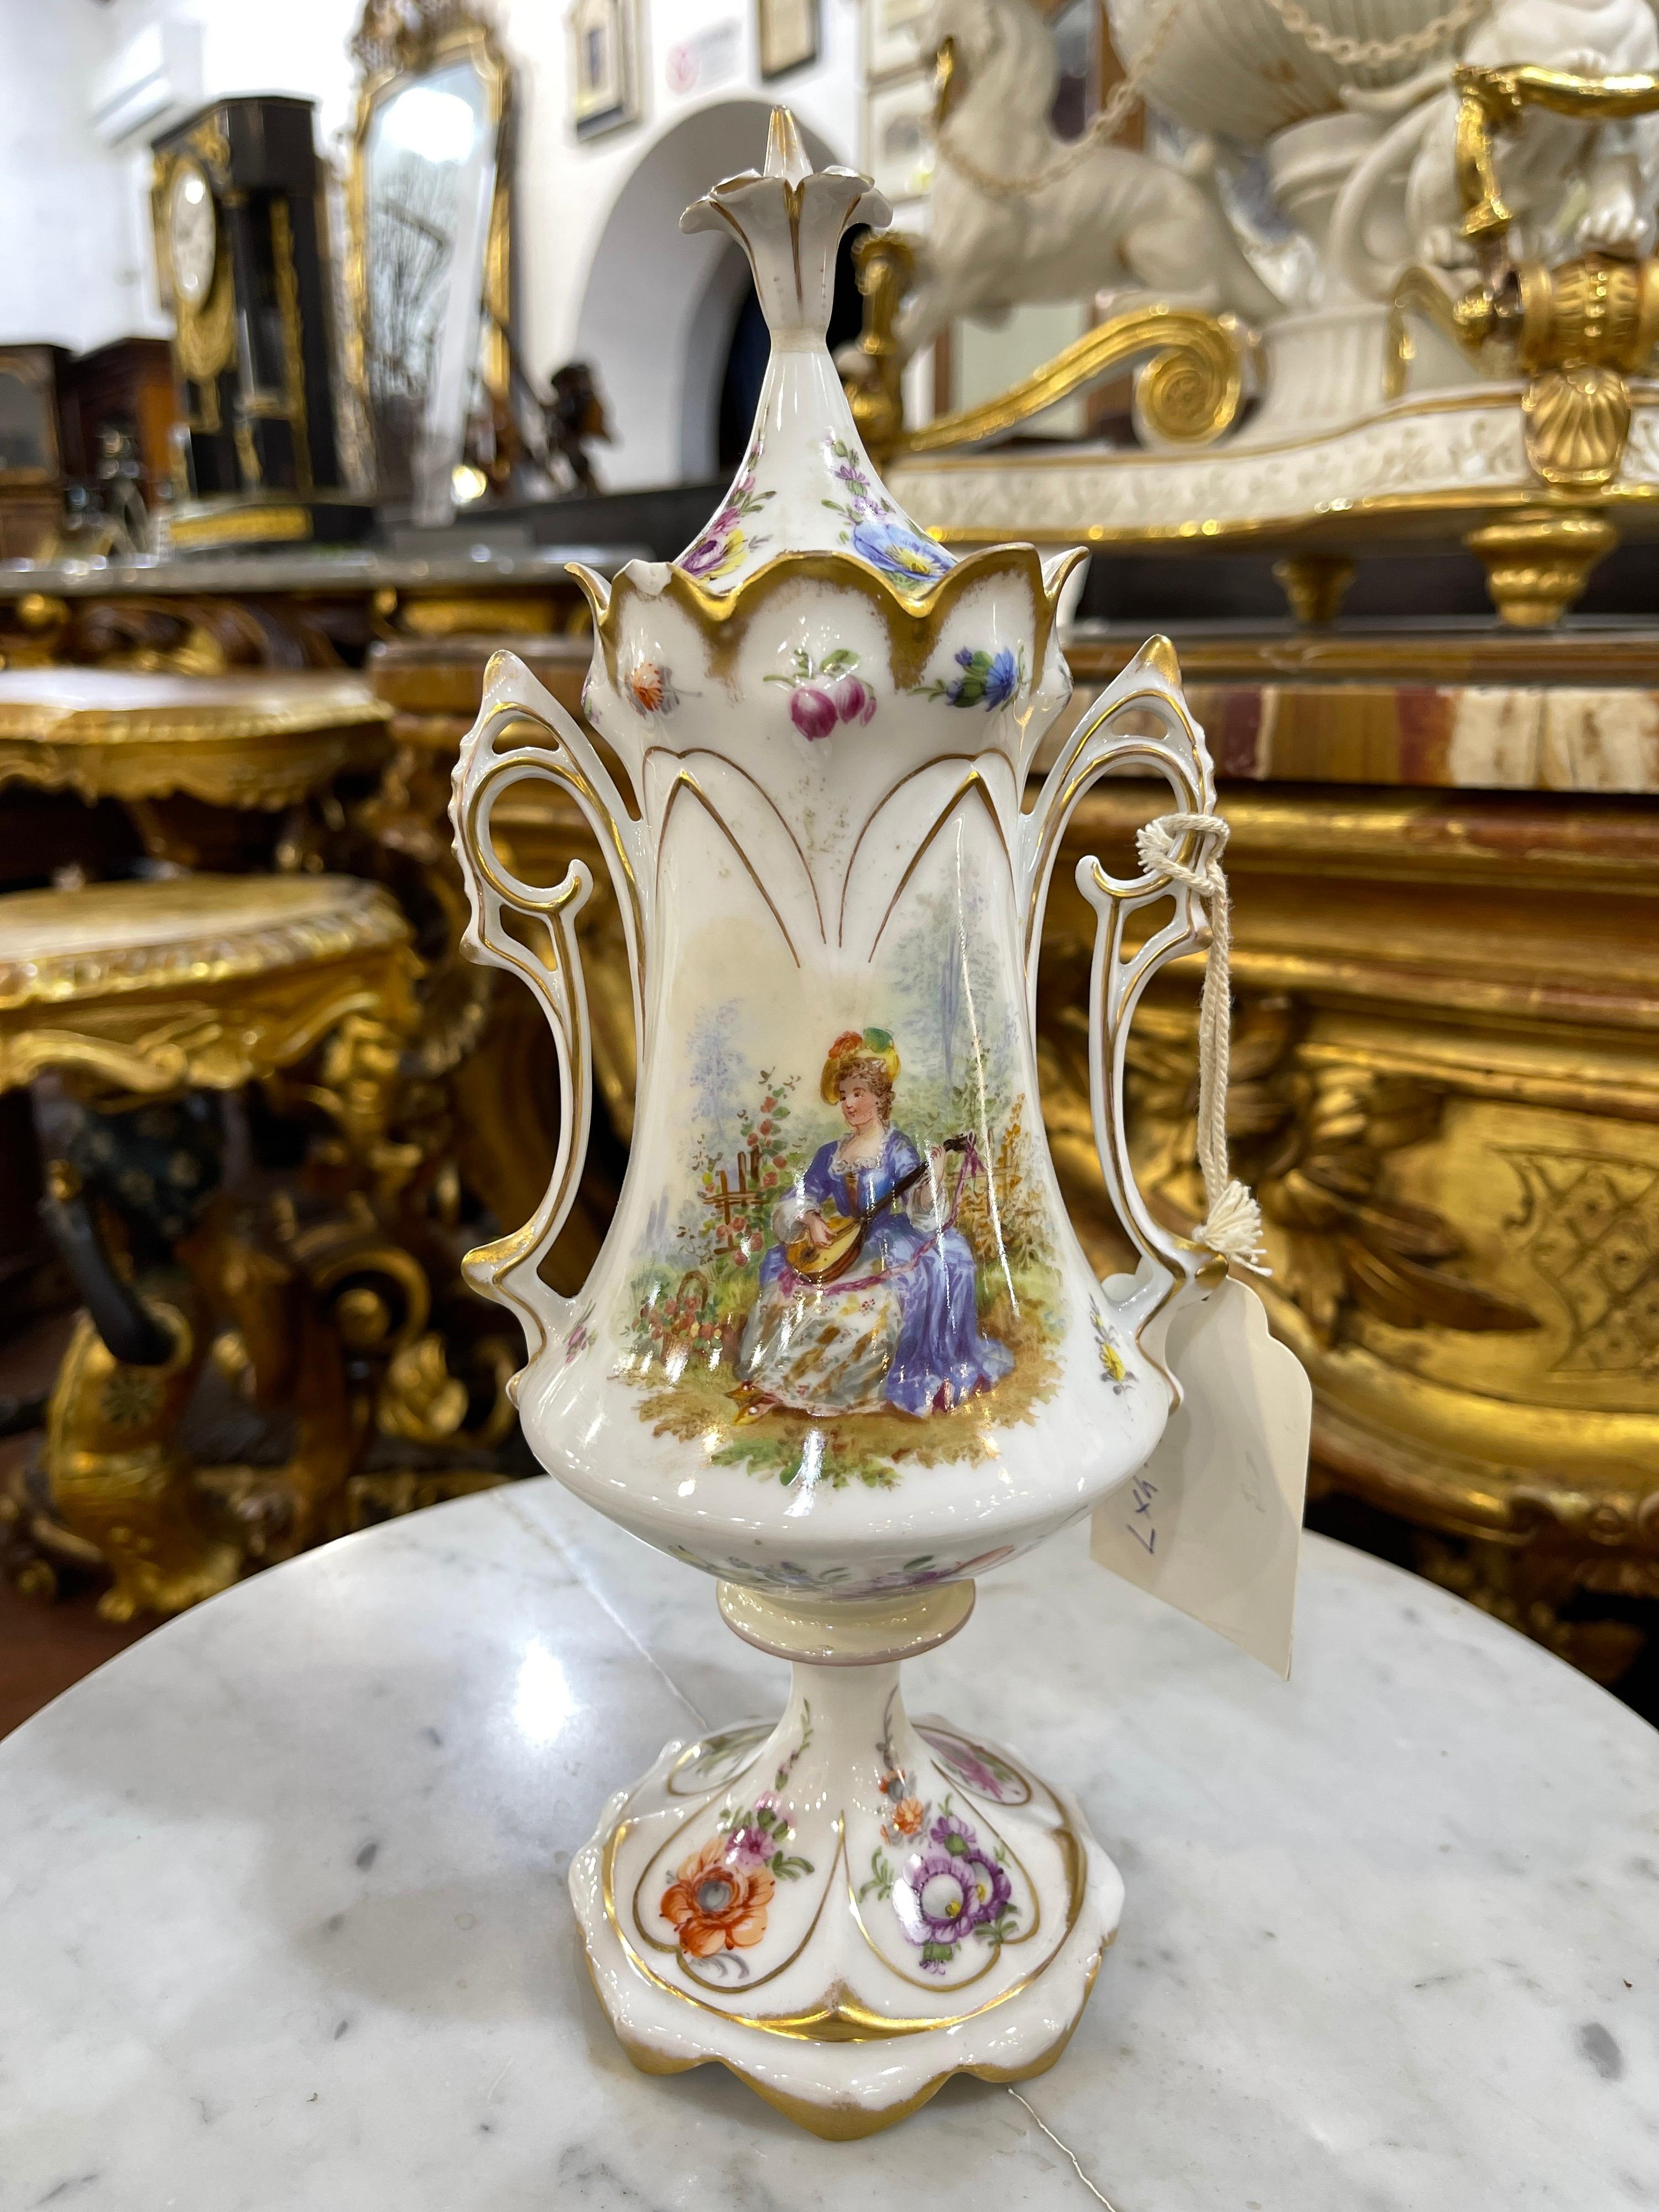 Porcelain vase, hand-painted, circa 1840-50. Dresden Porcelain. Vase with flower ornaments and two maidens, beautiful lily-shaped stopper. Small annoyance and from the inside you can see an old repair to consolidate the base.
Hand painted,